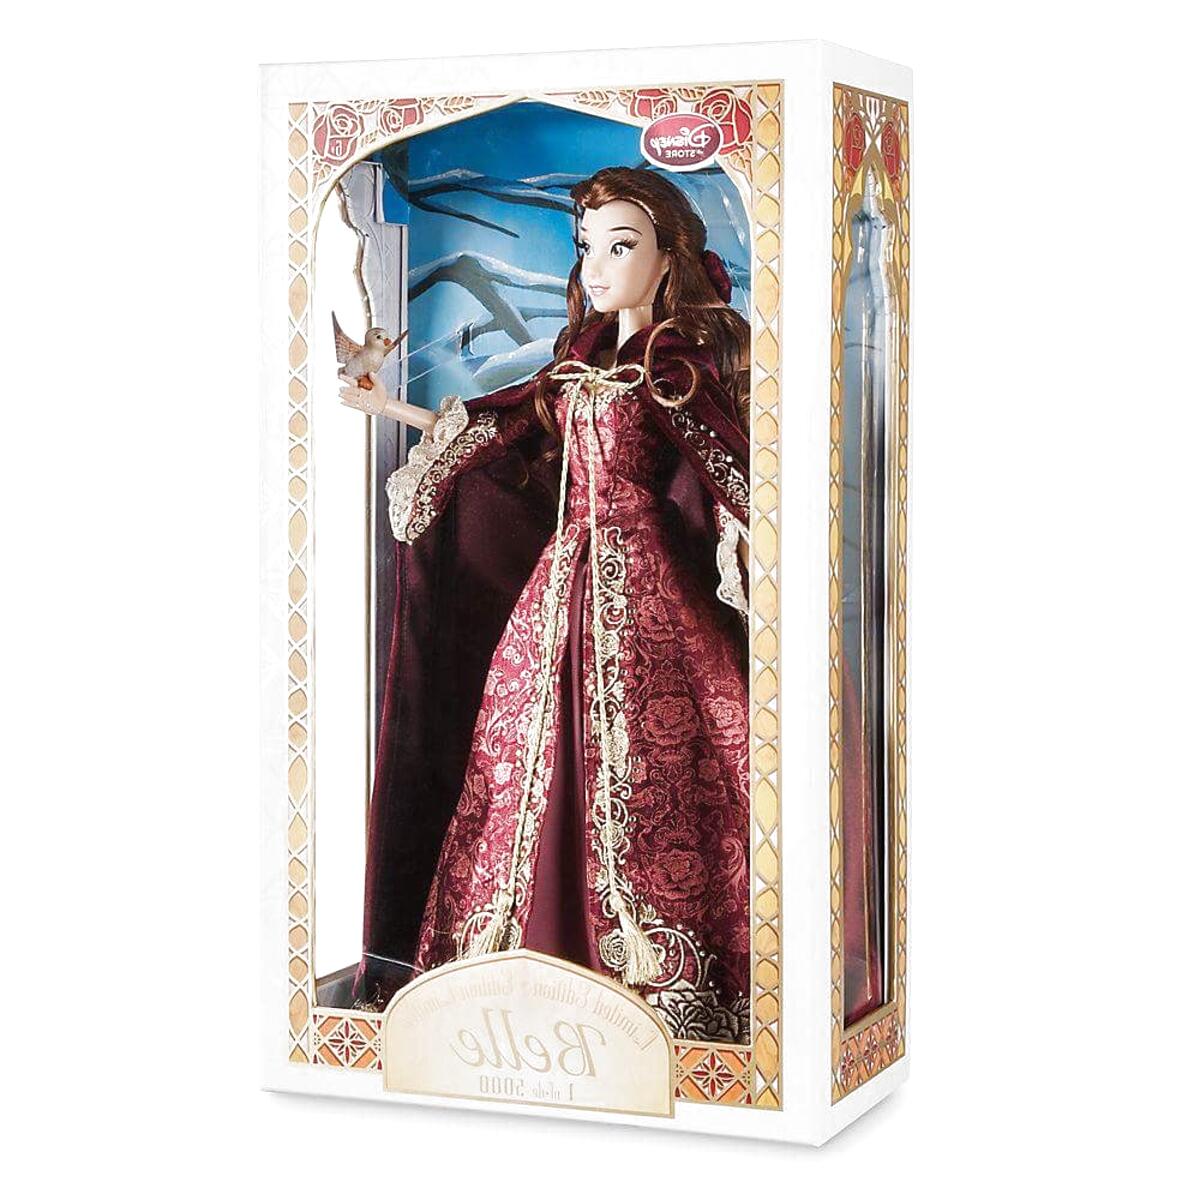 Disney Limited Edition Doll for sale in UK View 78 ads